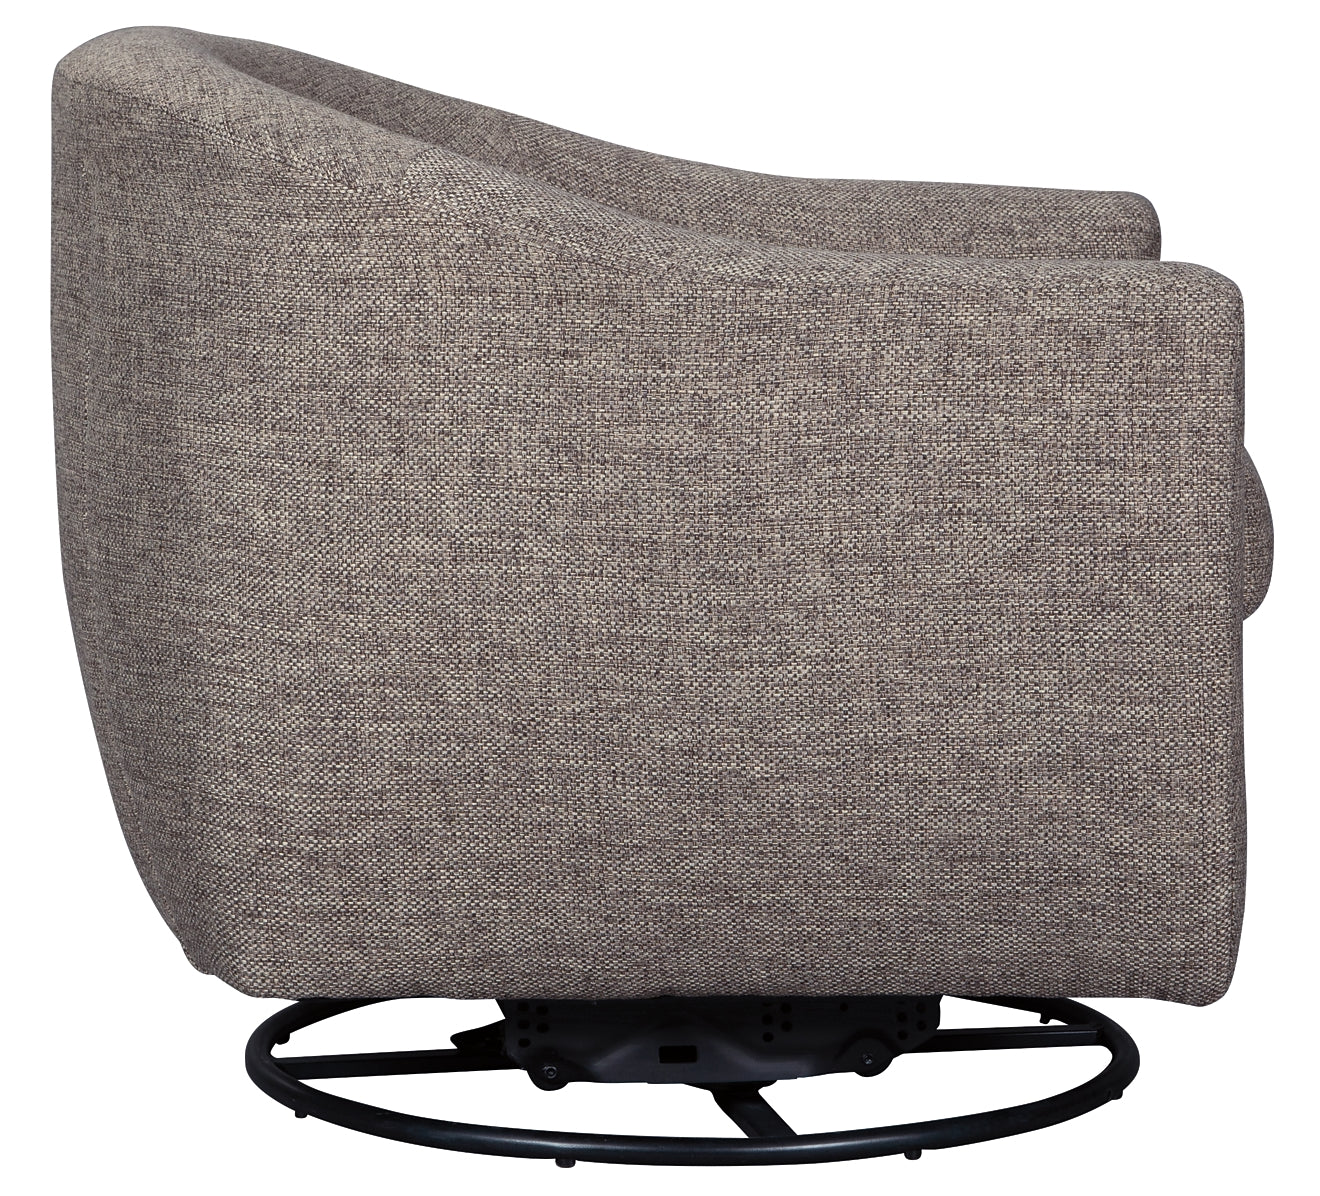 Upshur Swivel Glider Accent Chair Rent Wise Rent To Own Jacksonville, Florida